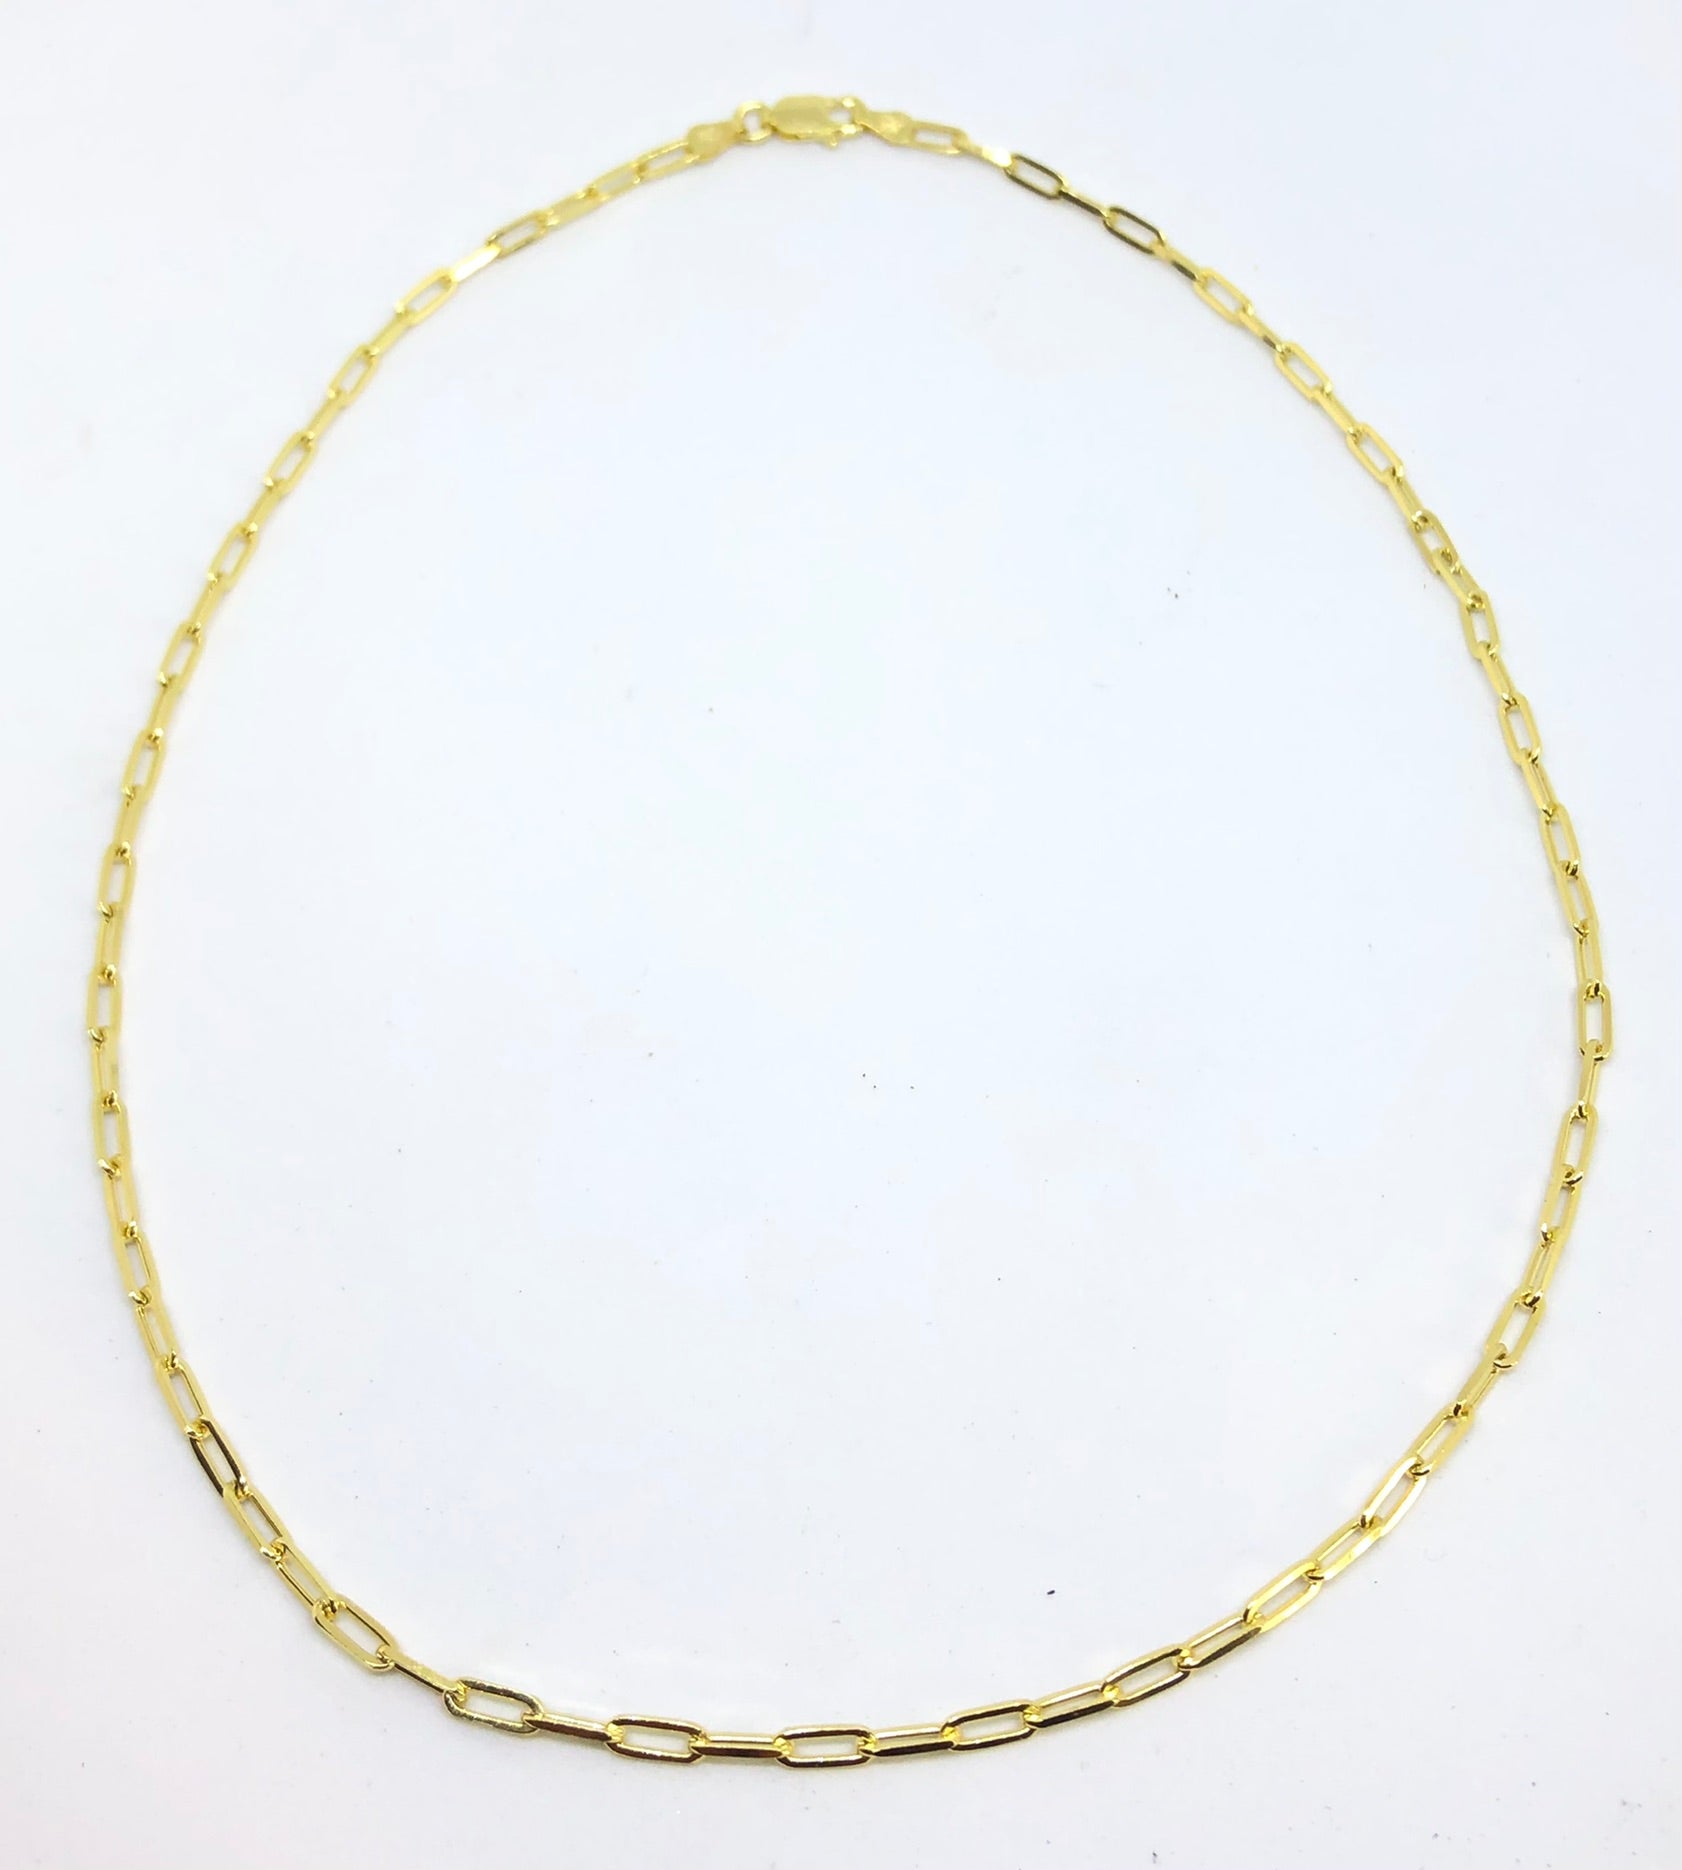 Paperclip Necklace, Gold Paperclip Chain Necklace, 16, 18, 20 Inches 14K  Gold Filled Chain Necklace, 2mm Width Paper Clip Chain Necklace - Etsy  Canada